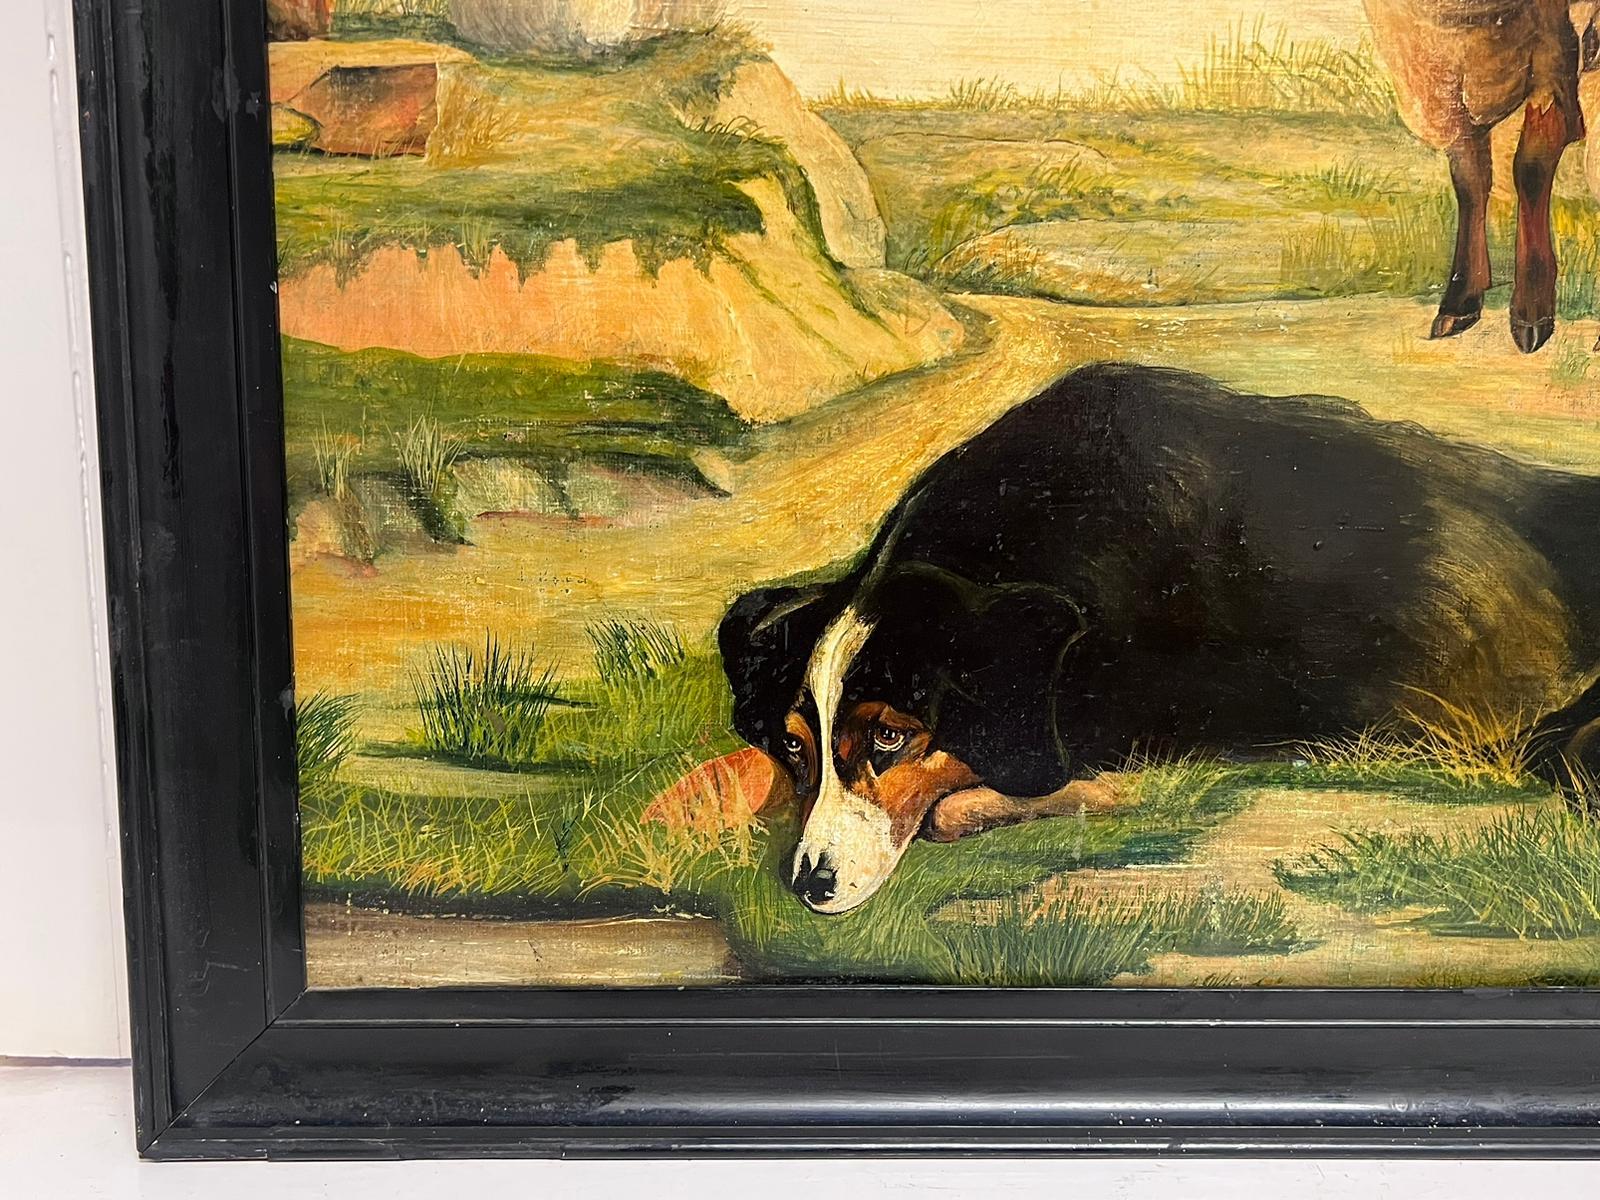 The Sheep Dog
English Naive/ Folk Art painter, late 19th century
oil painting on canvas, framed

framed: 26 x 34 inches
canvas: 21.5 x 29 inches
good/ sound condition
from a private UK collection